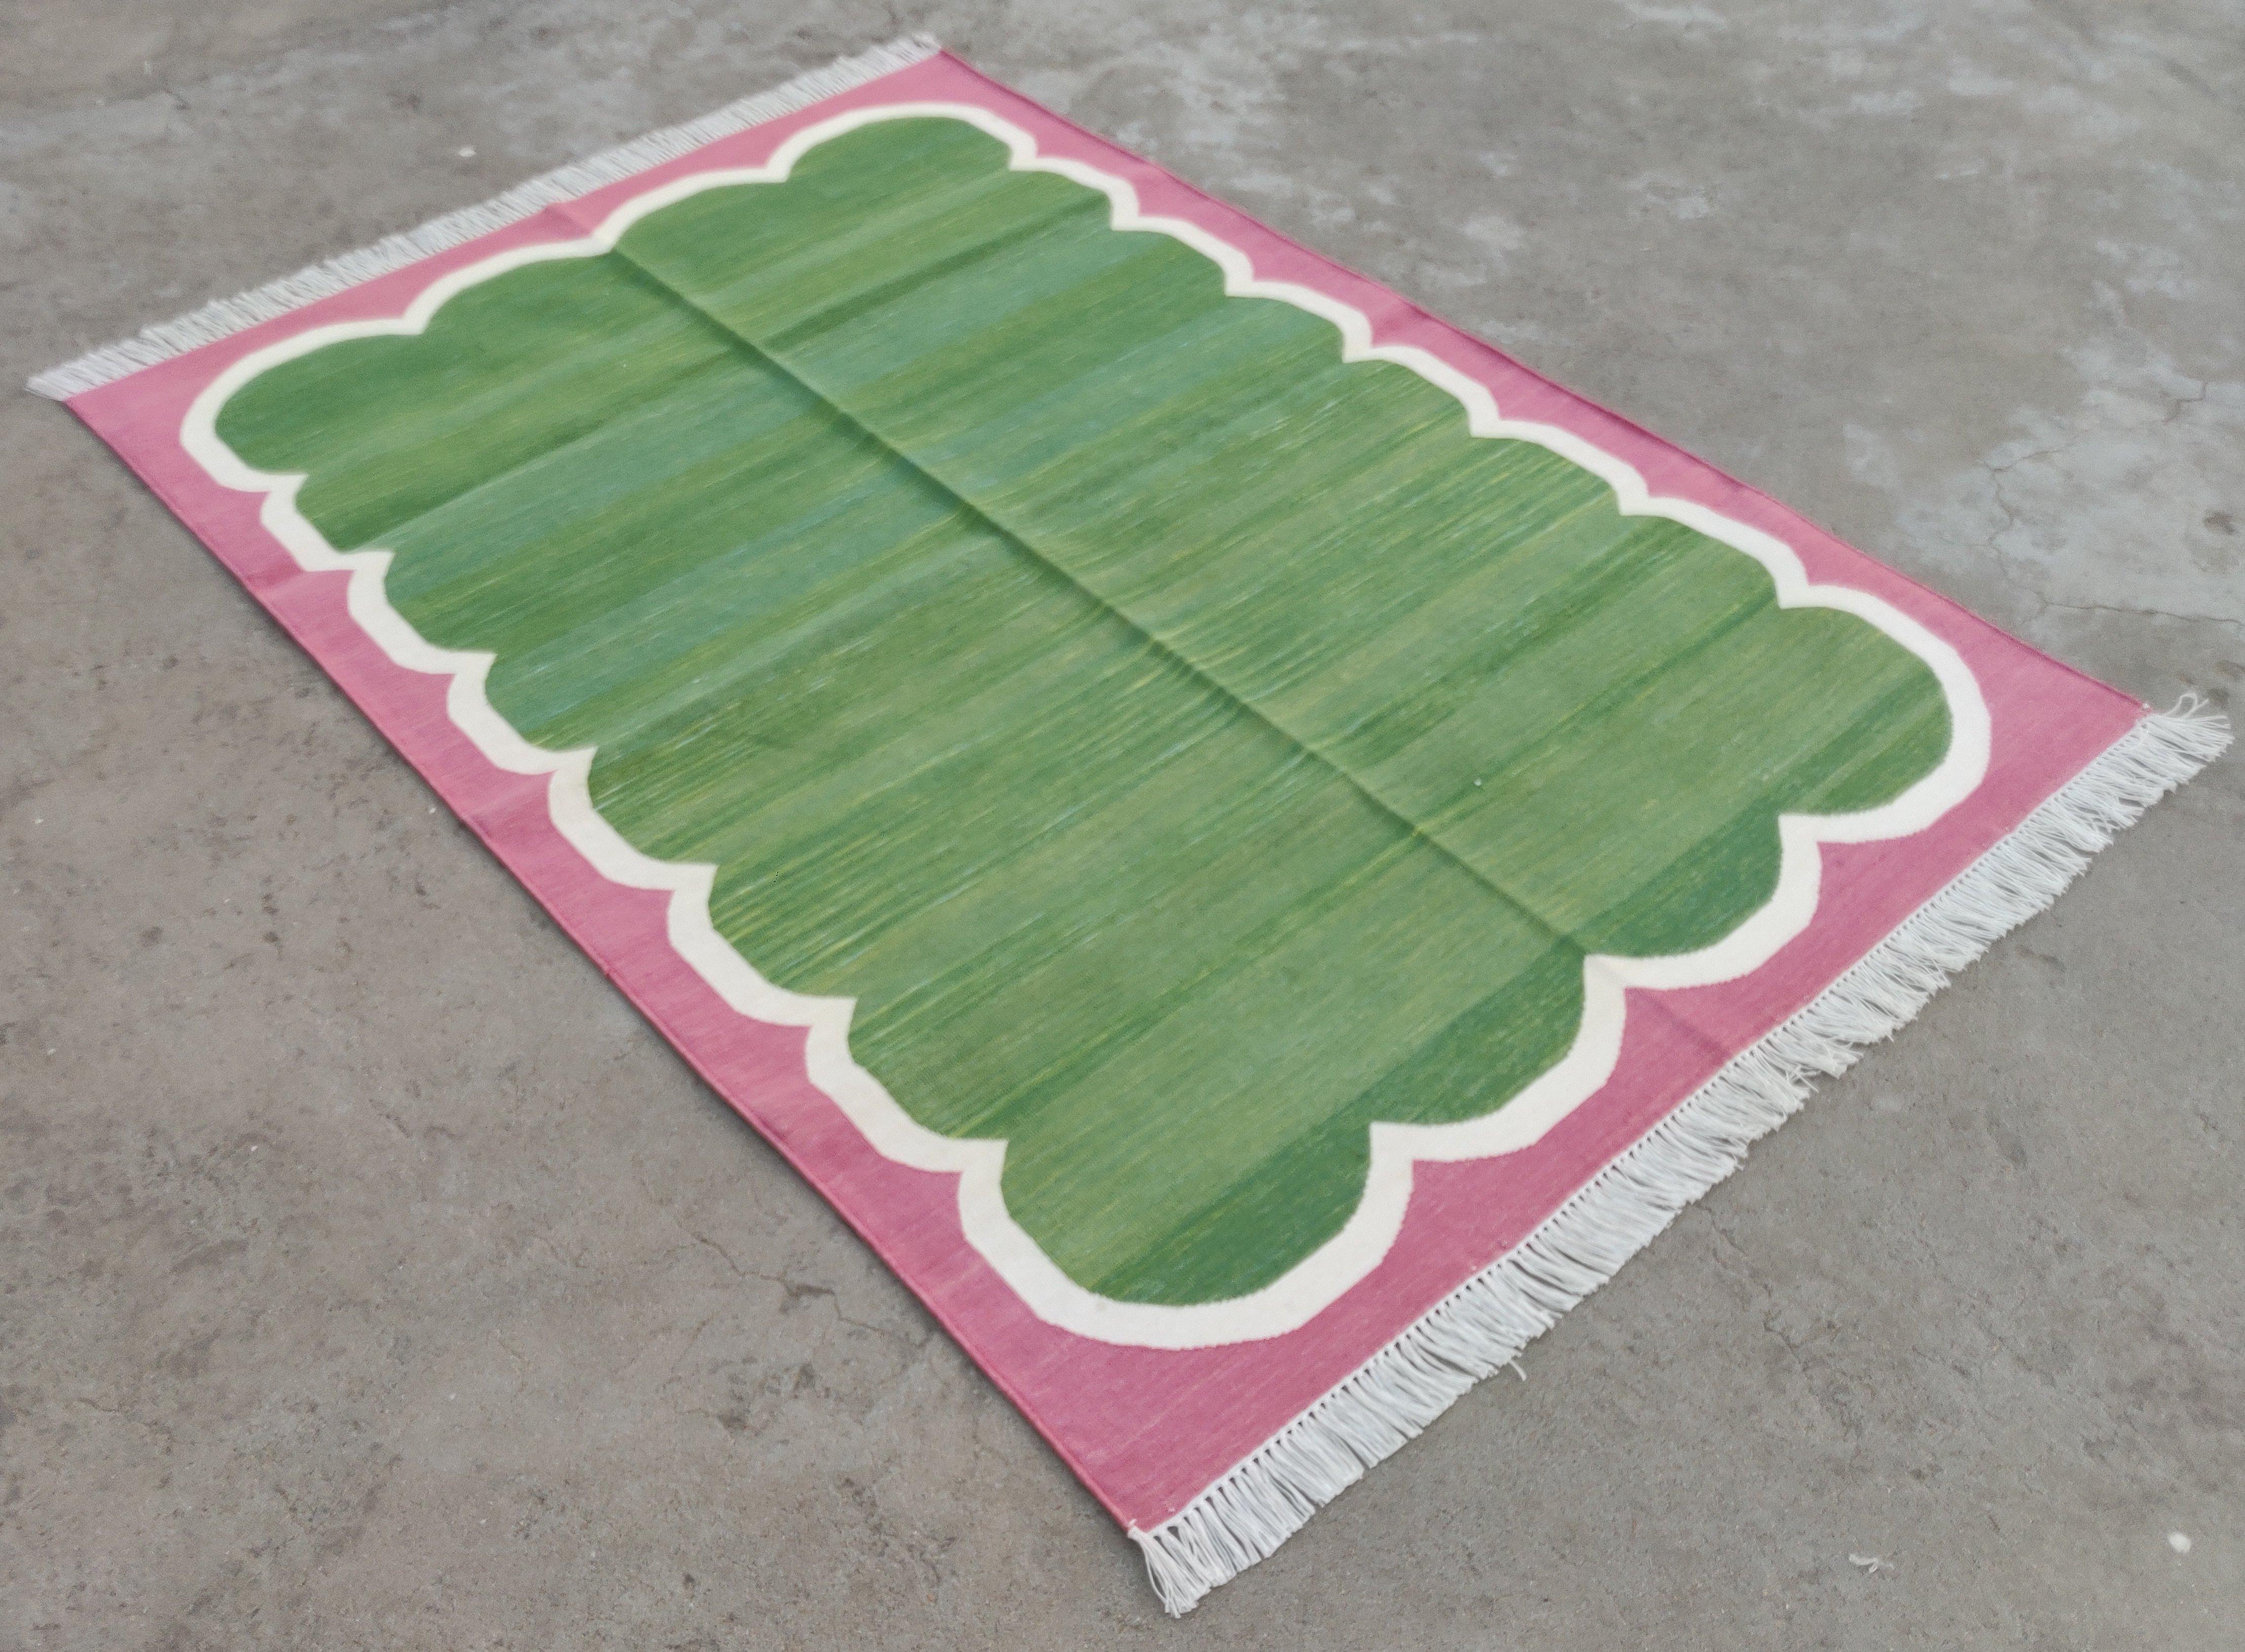 Cotton Natural Vegetable Dyed, Forest Green, Cream And Raspberry Pink Scalloped Striped Indian Rug - 5'x7'
These special flat-weave dhurries are hand-woven with 15 ply 100% cotton yarn. Due to the special manufacturing techniques used to create our